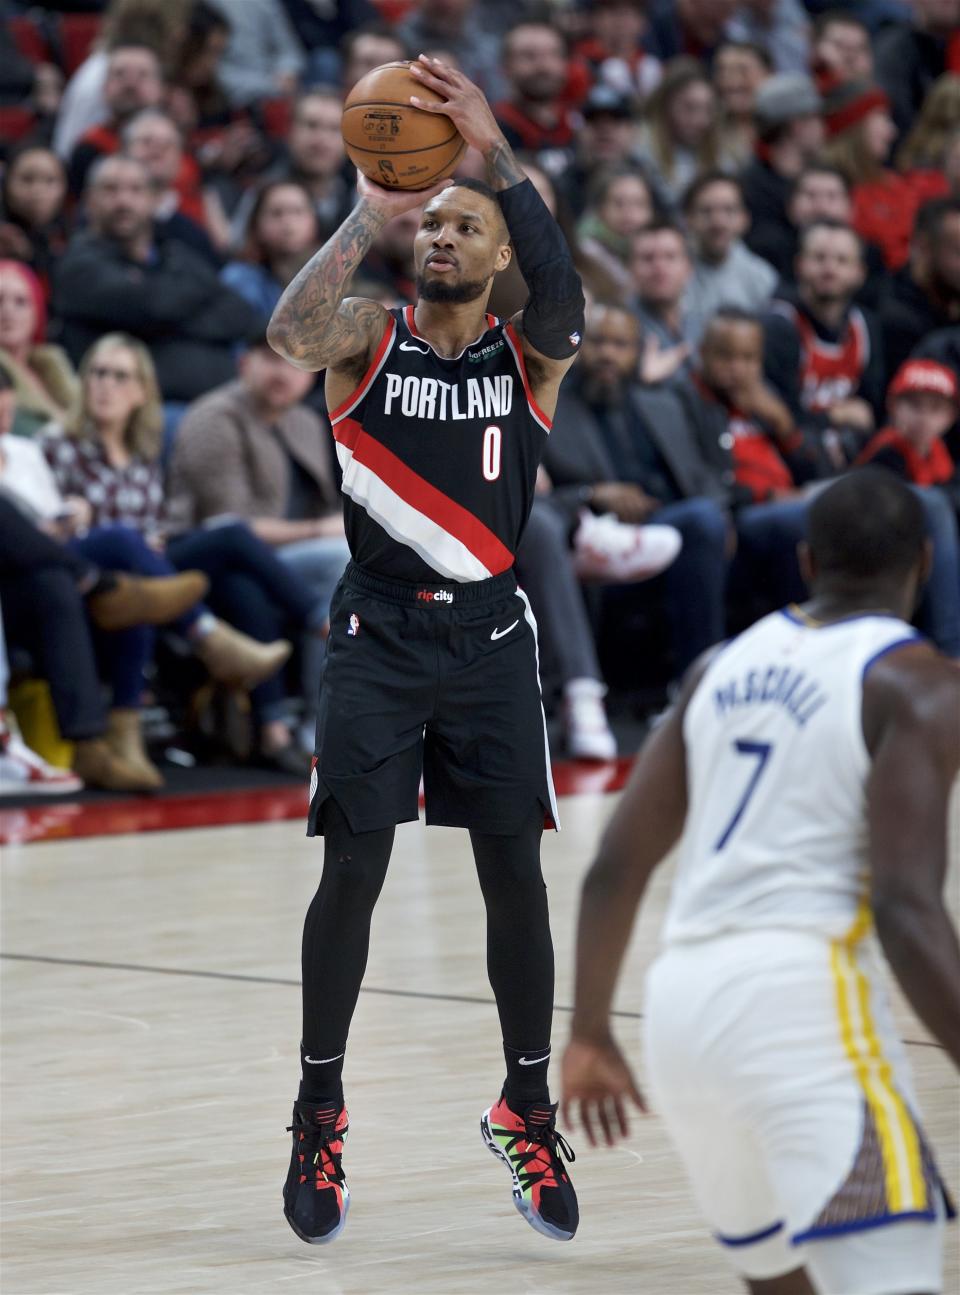 Portland Trail Blazers guard Damian Lillard shoots a 3-point basket against the Golden State Warriors during the second half of an NBA basketball game in Portland, Ore., Monday, Jan. 20, 2020. (AP Photo/Craig Mitchelldyer)